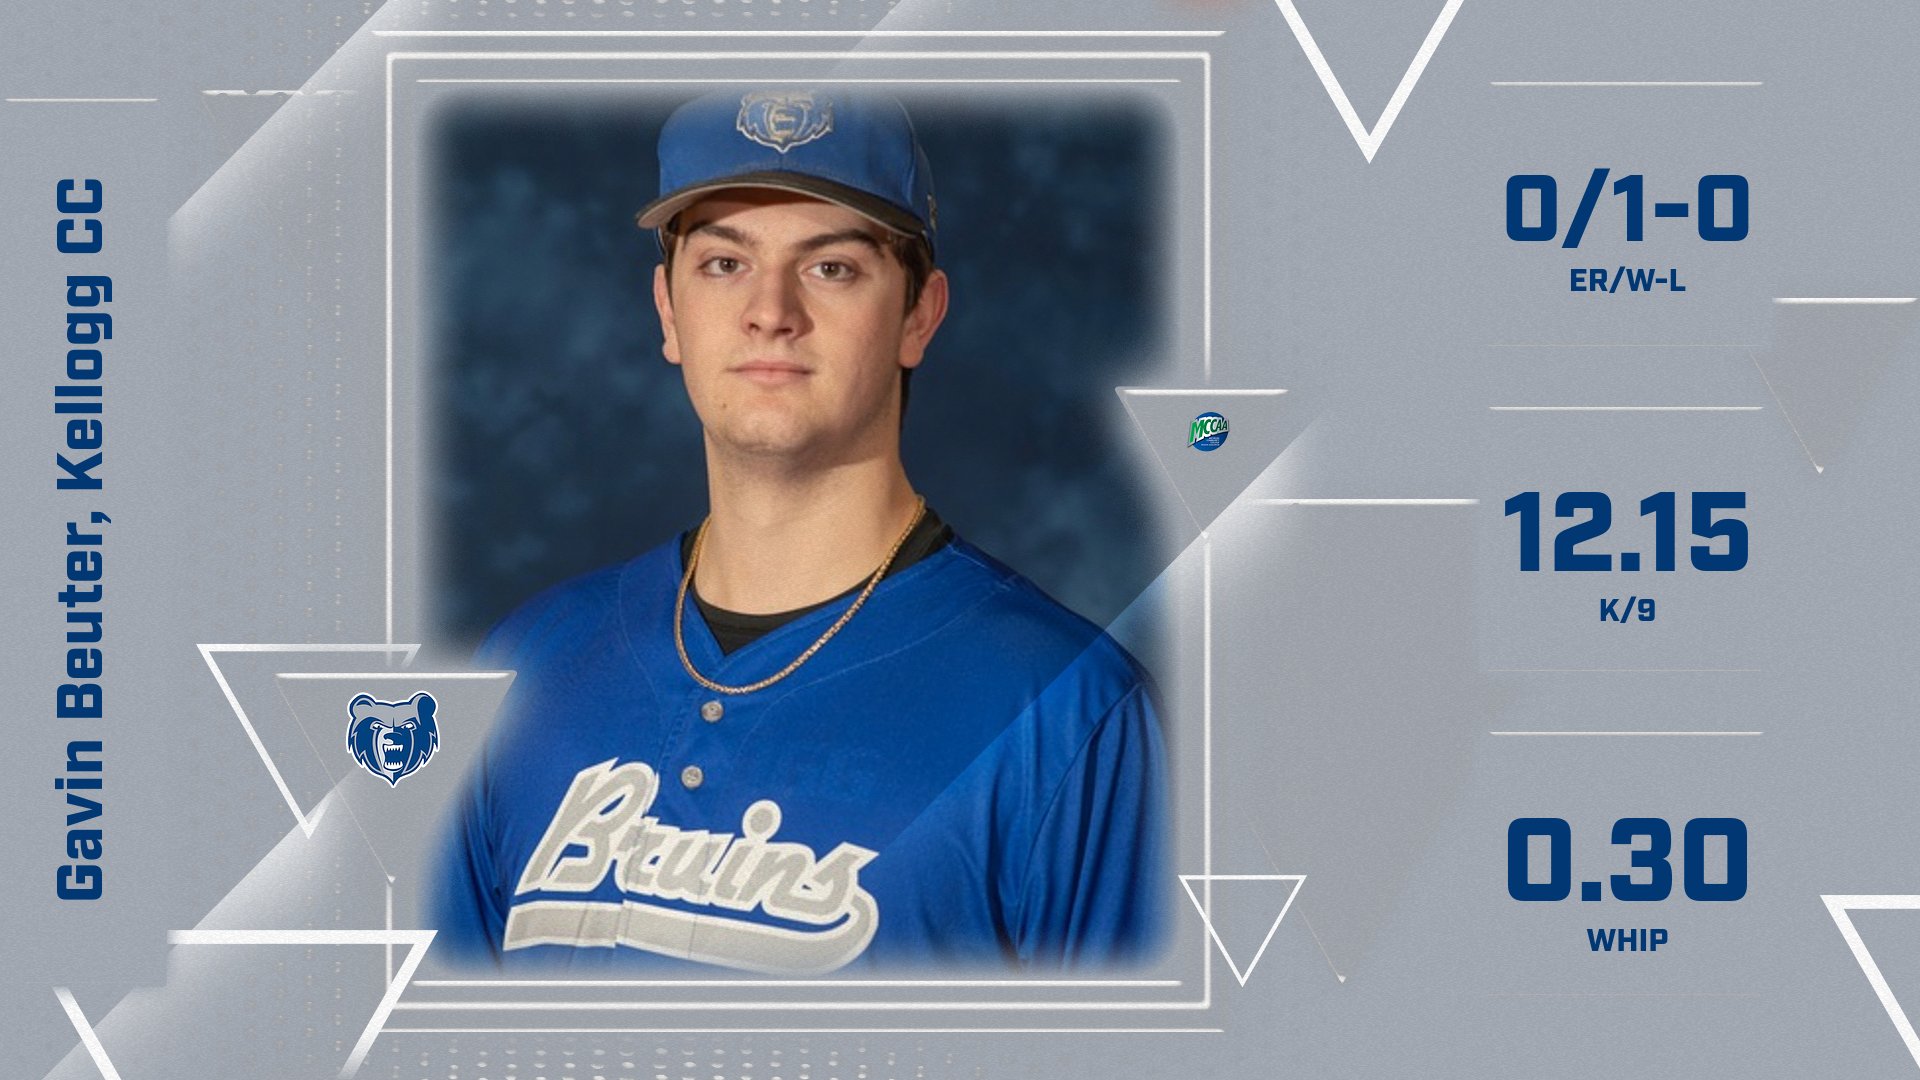 Kellogg's Beuter Makes MCCAA Western Conference Baseball Pitcher of the Week4